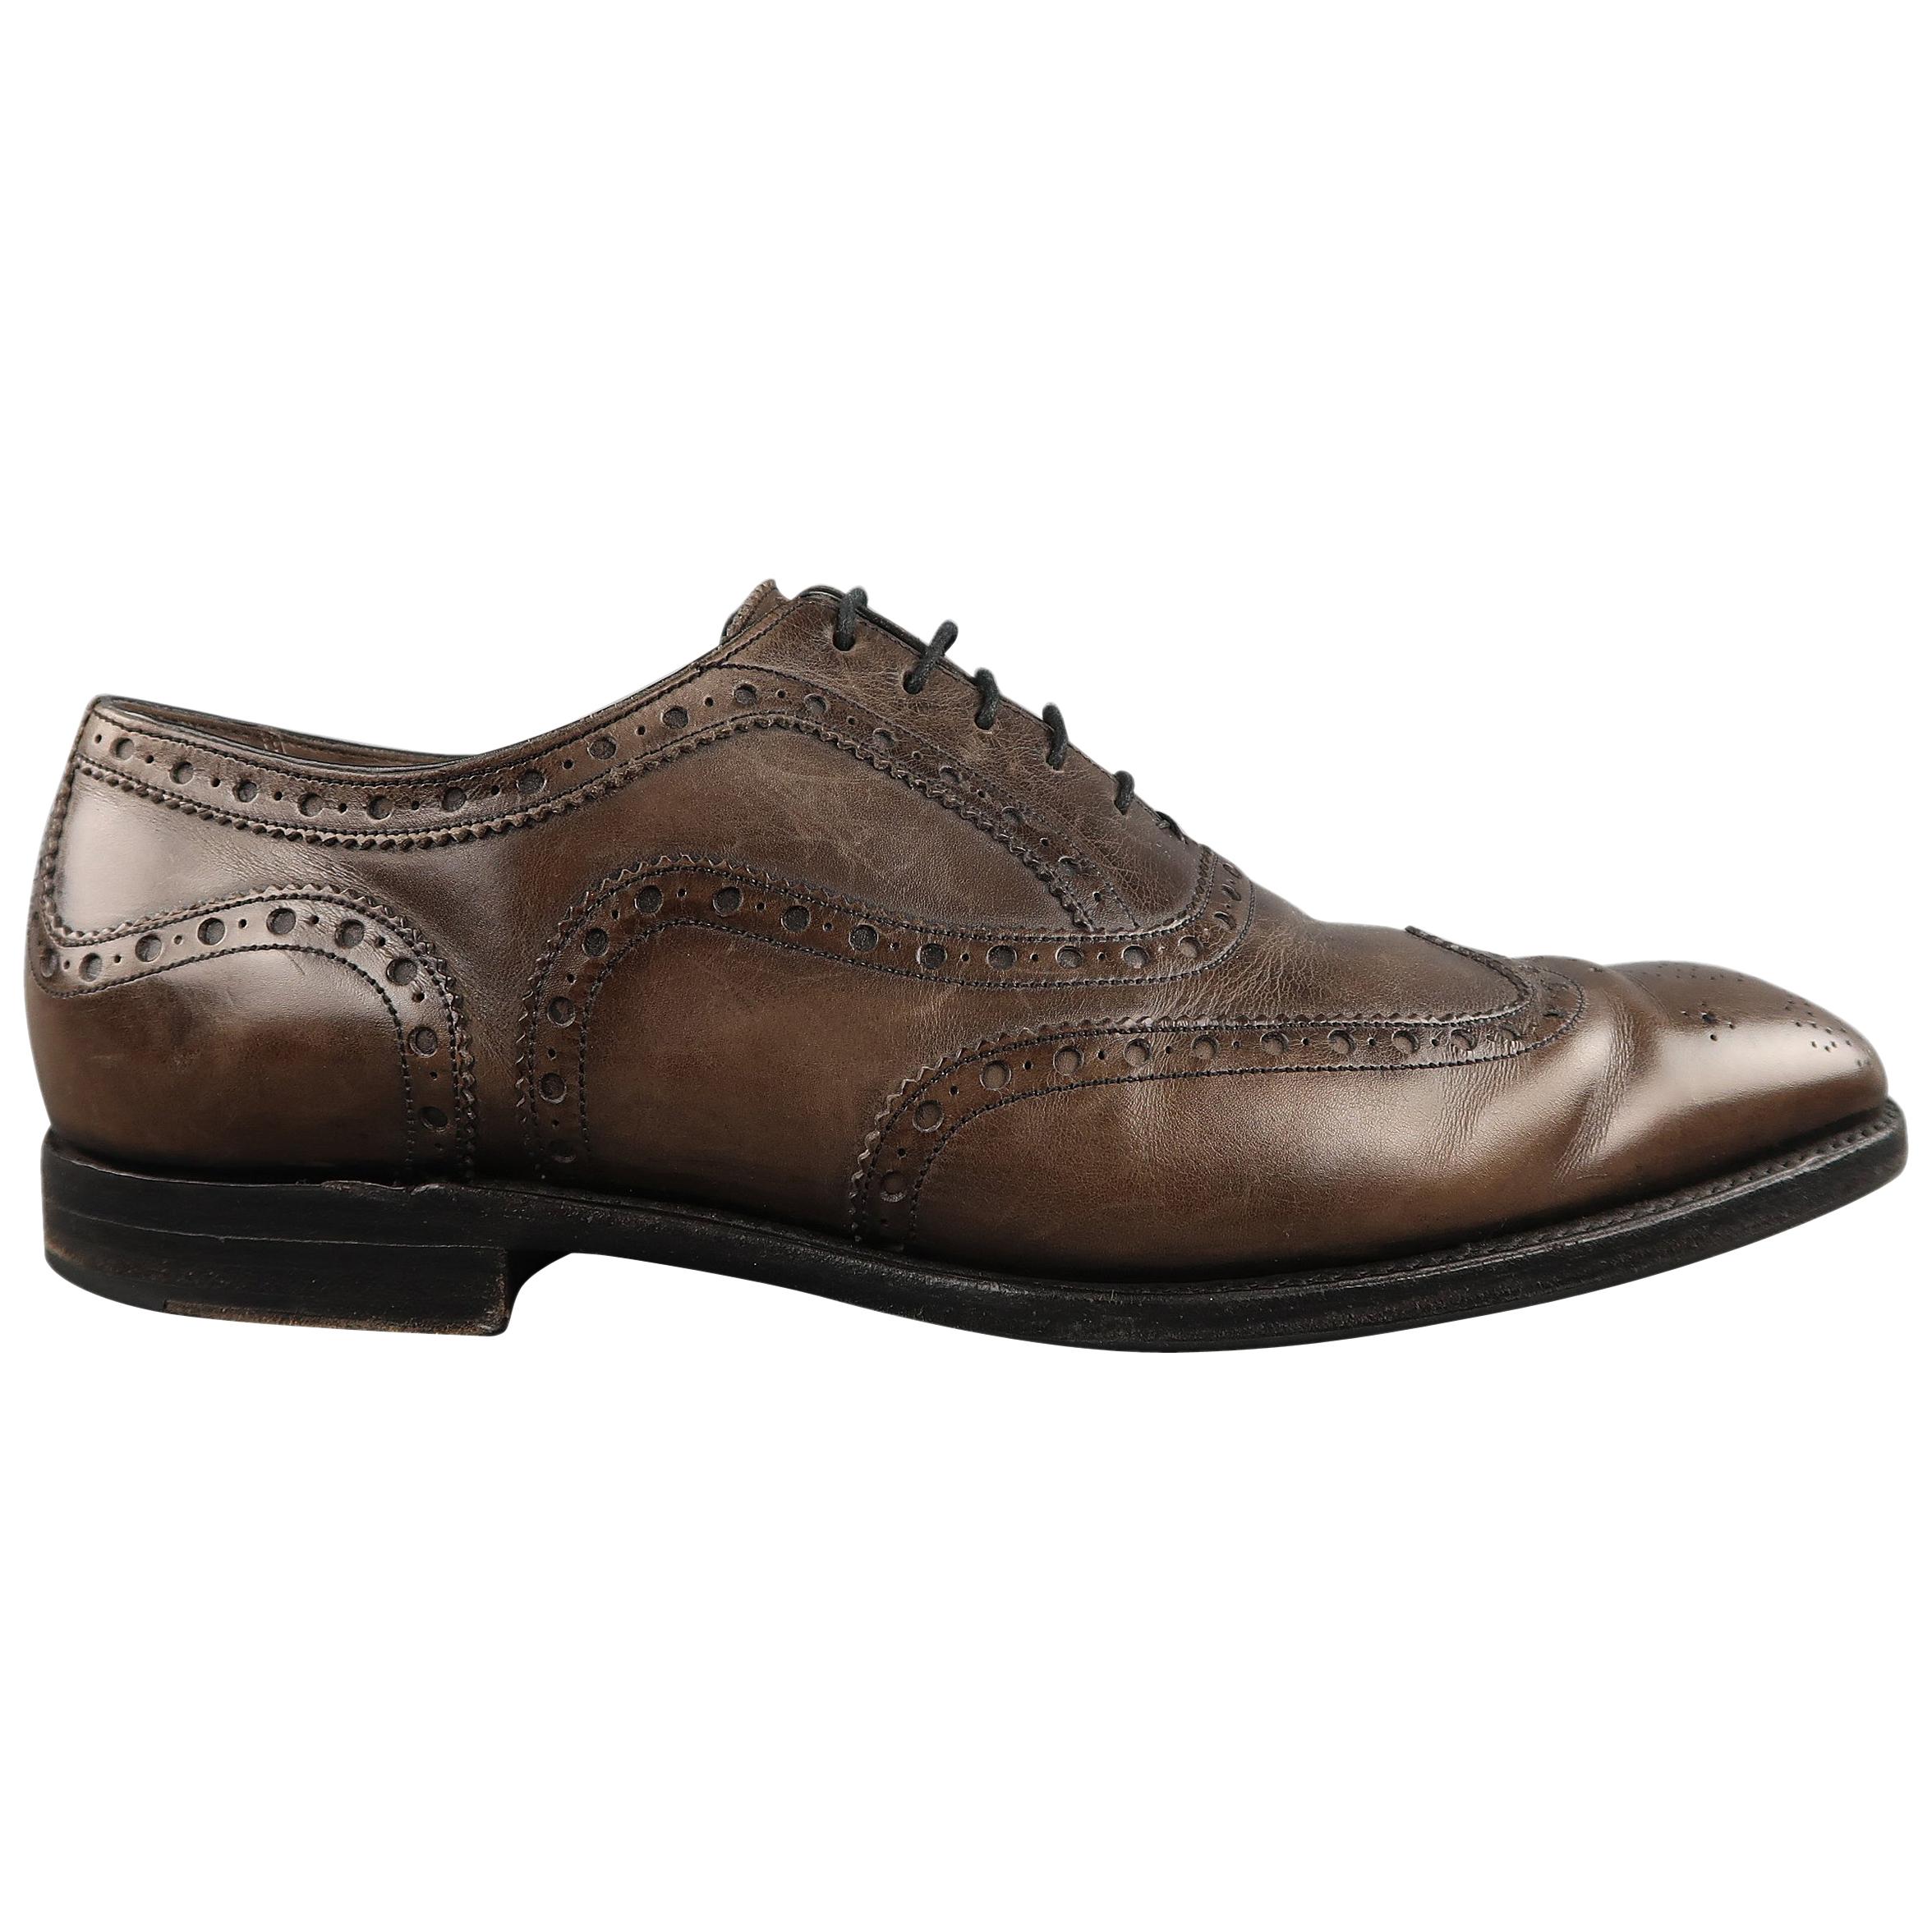 BARKER BLACK ARCHDALE Size 10 Taupe Gray Leather Wingtip Brogues